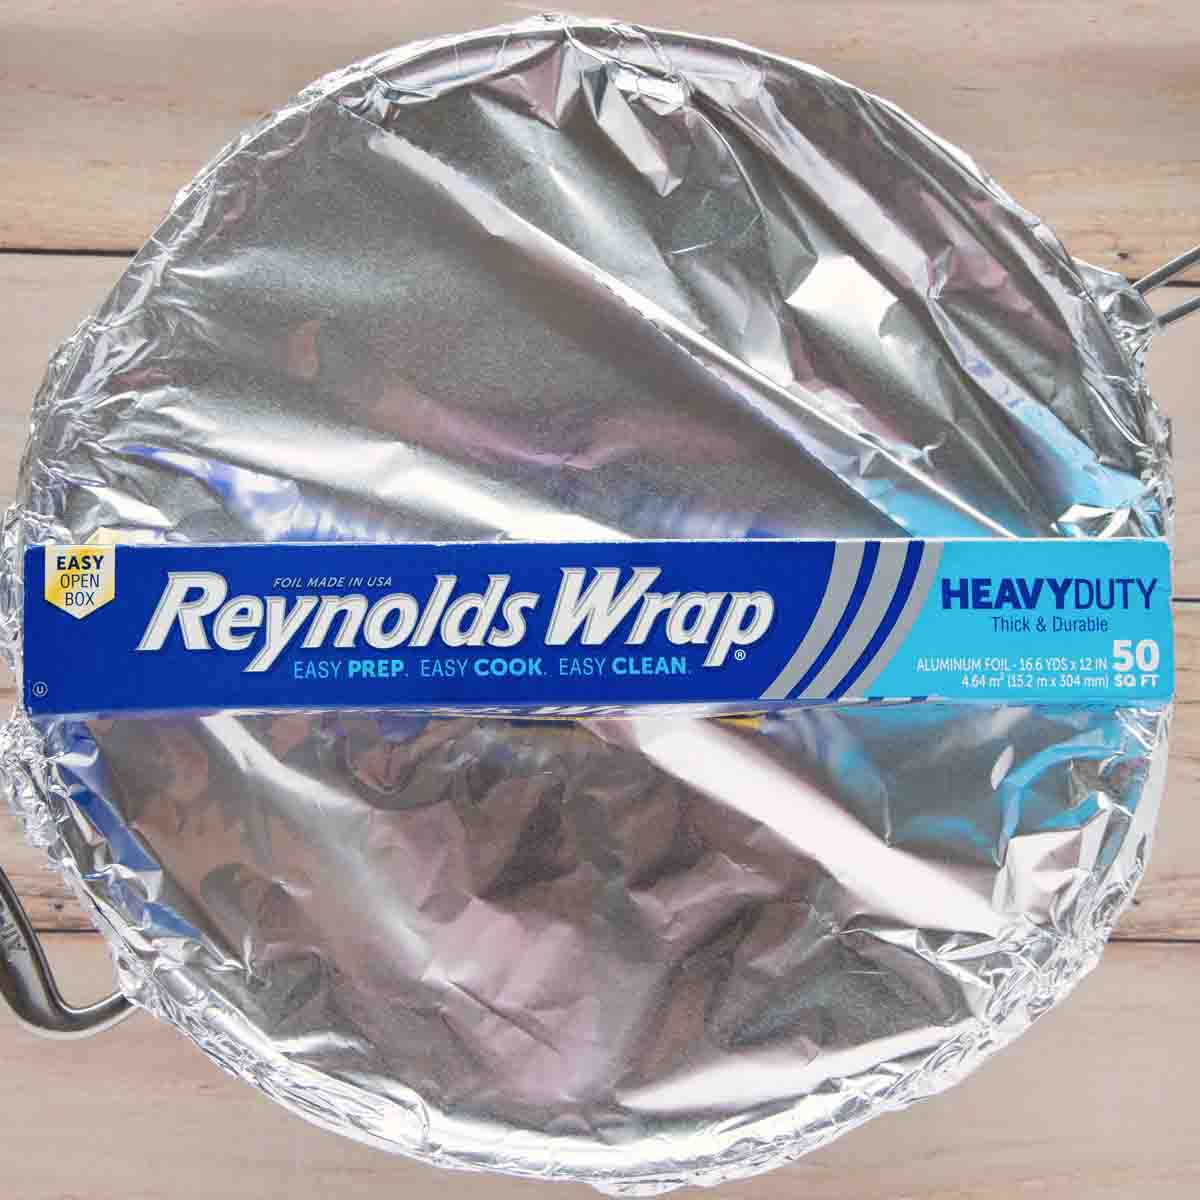 large skillet with pork chops covered in foil with a box of Reynolds wrap foil on top of the pot